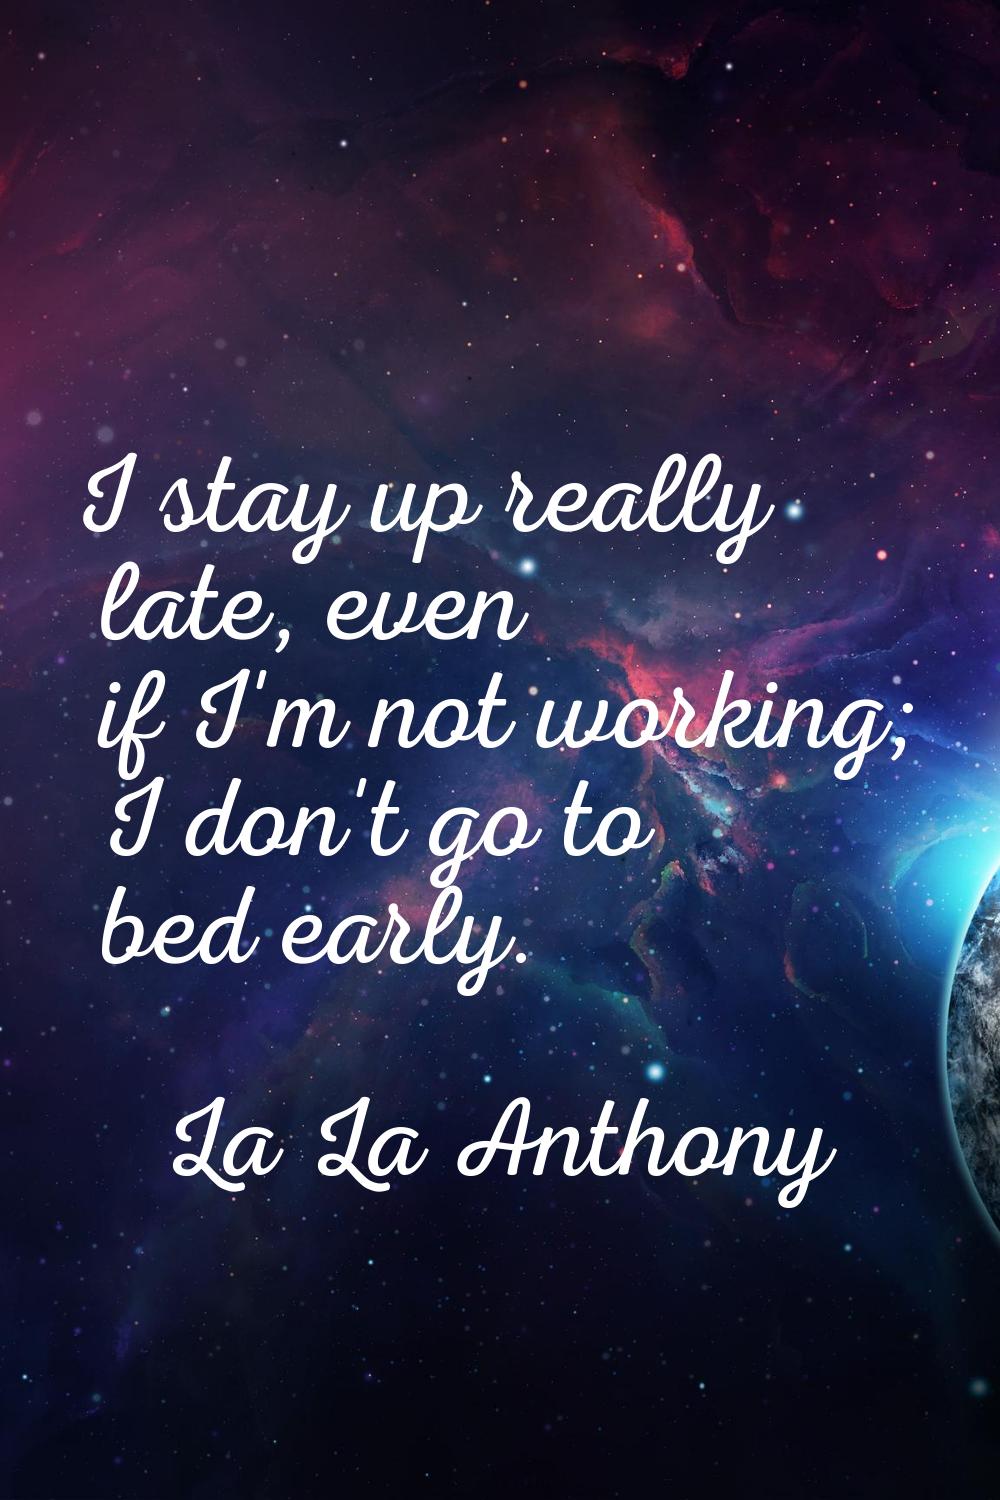 I stay up really late, even if I'm not working; I don't go to bed early.